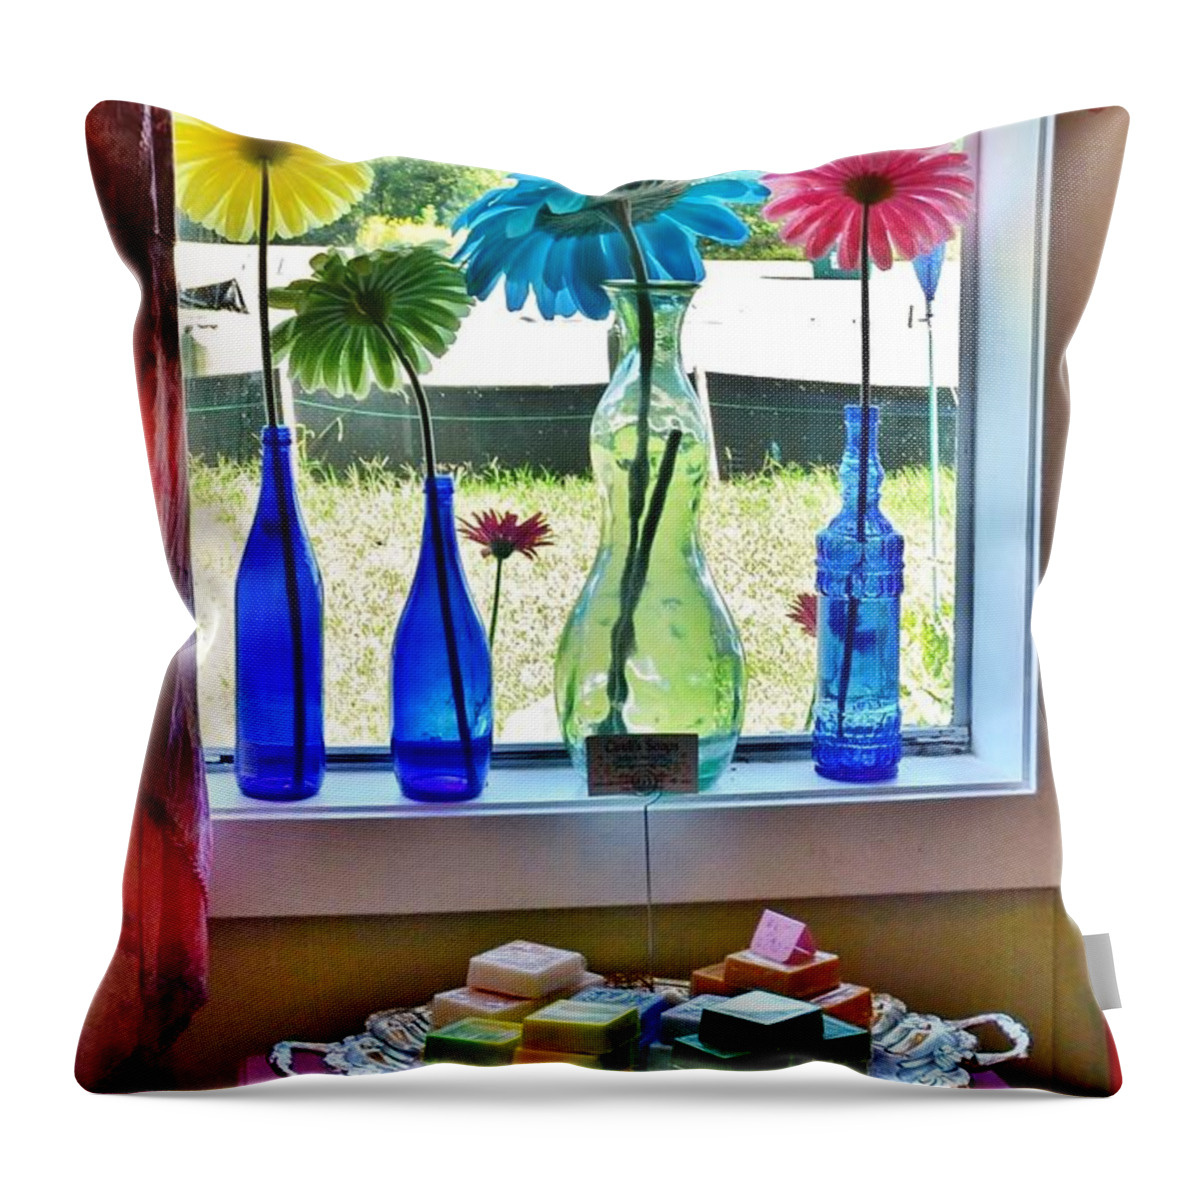 Liddy Loves Clothes Throw Pillow featuring the photograph Liddy Loves Clothes 8 - Clarksville Delaware by Kim Bemis